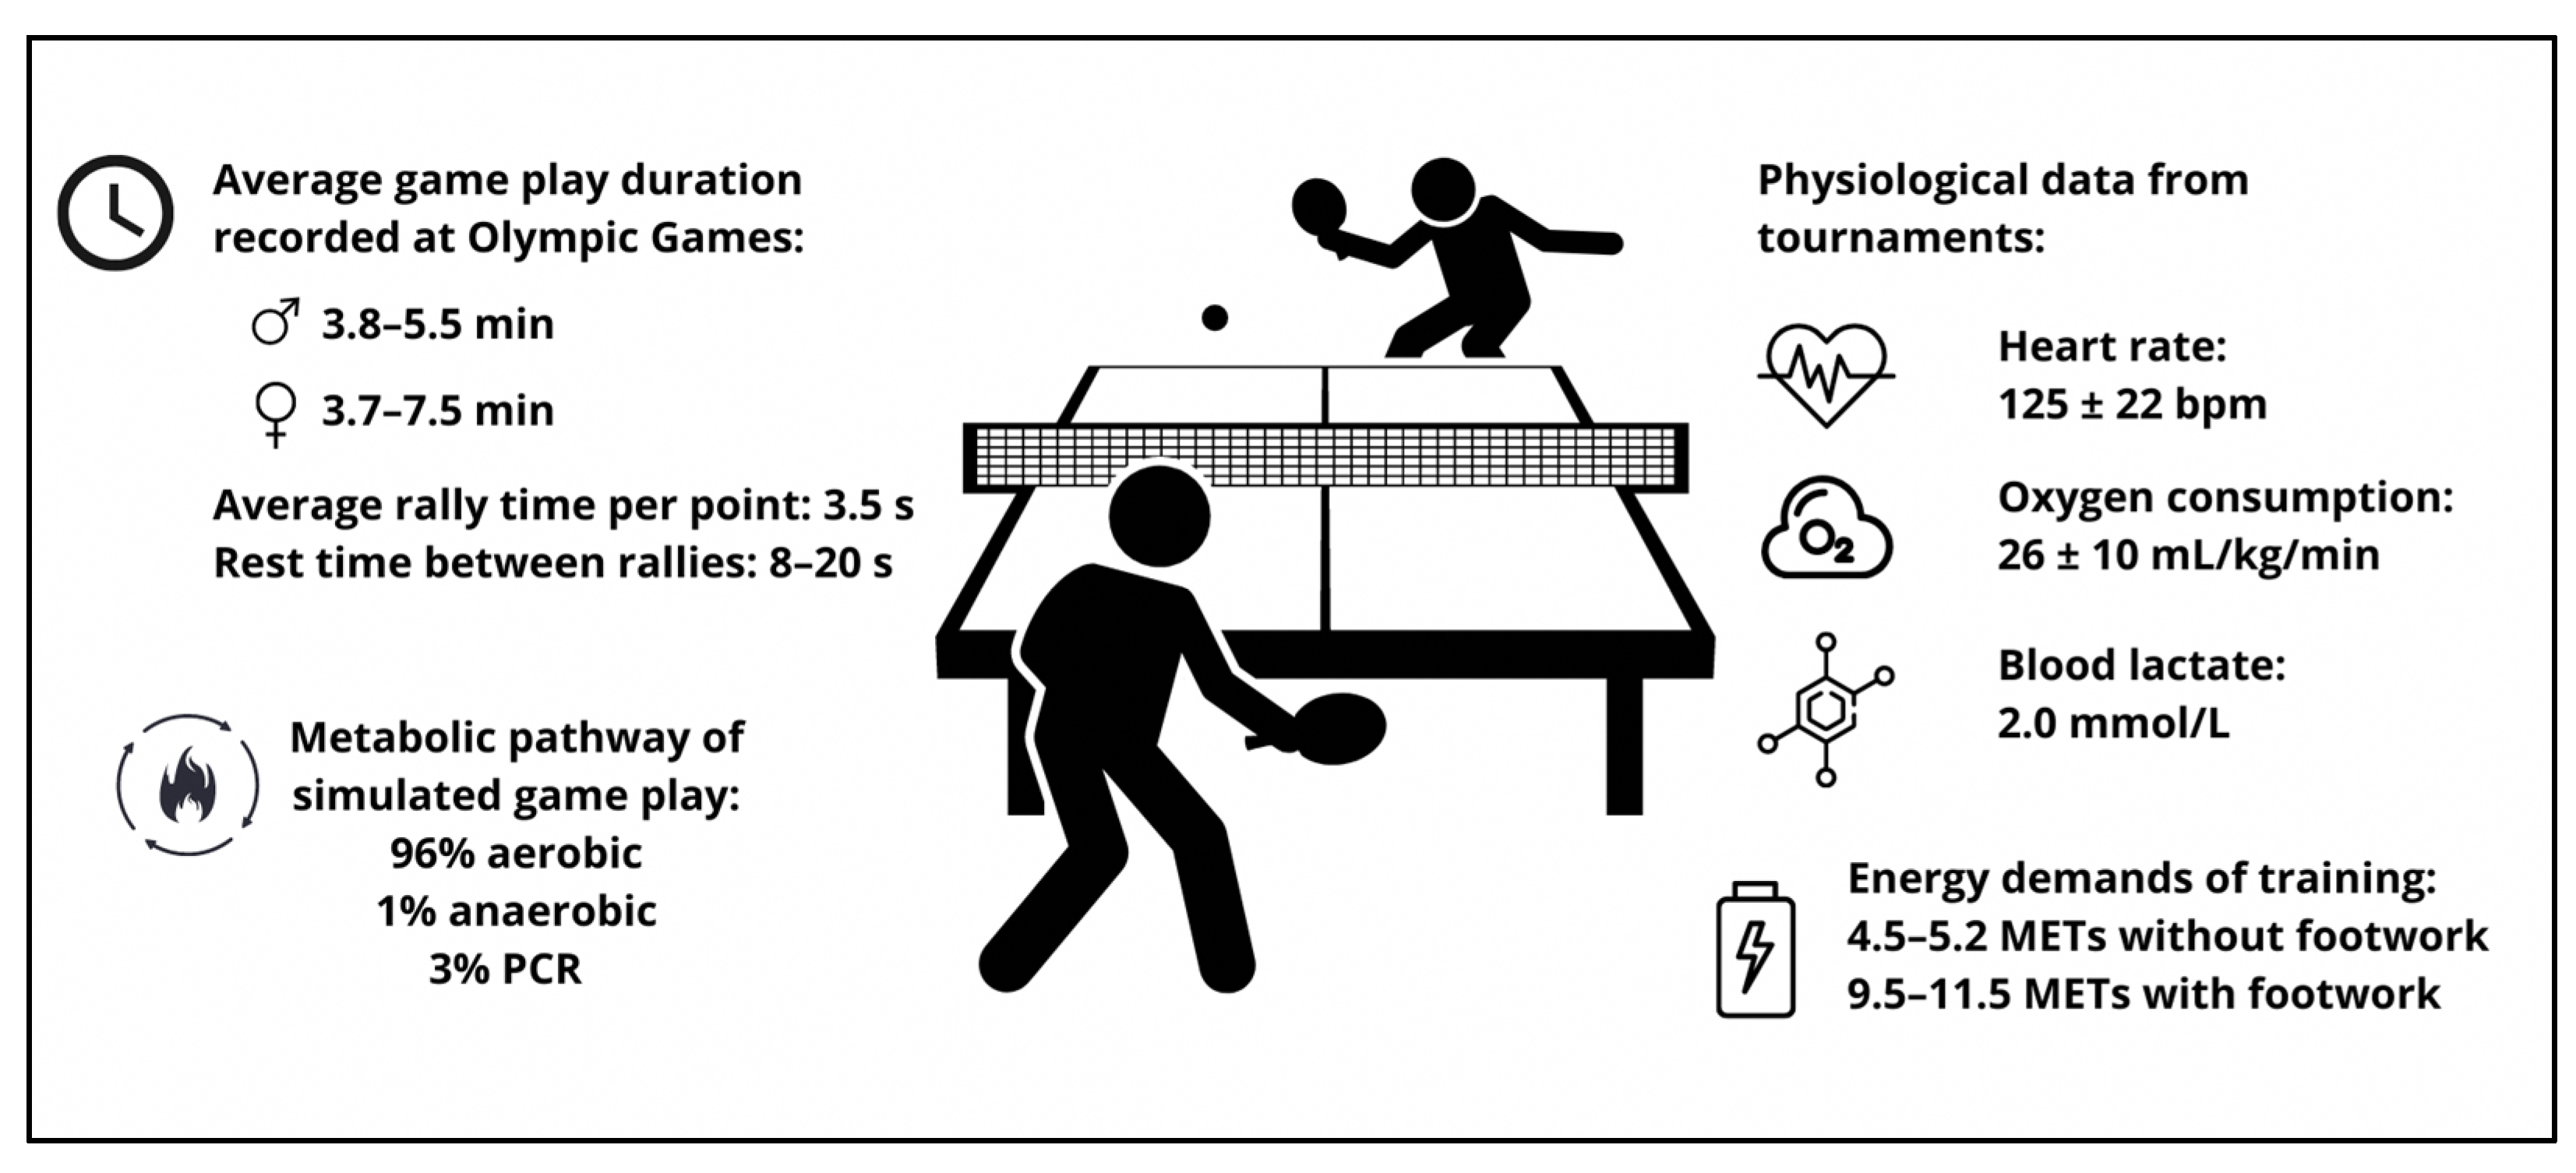 Olympic Ping Pong Rules and Laws